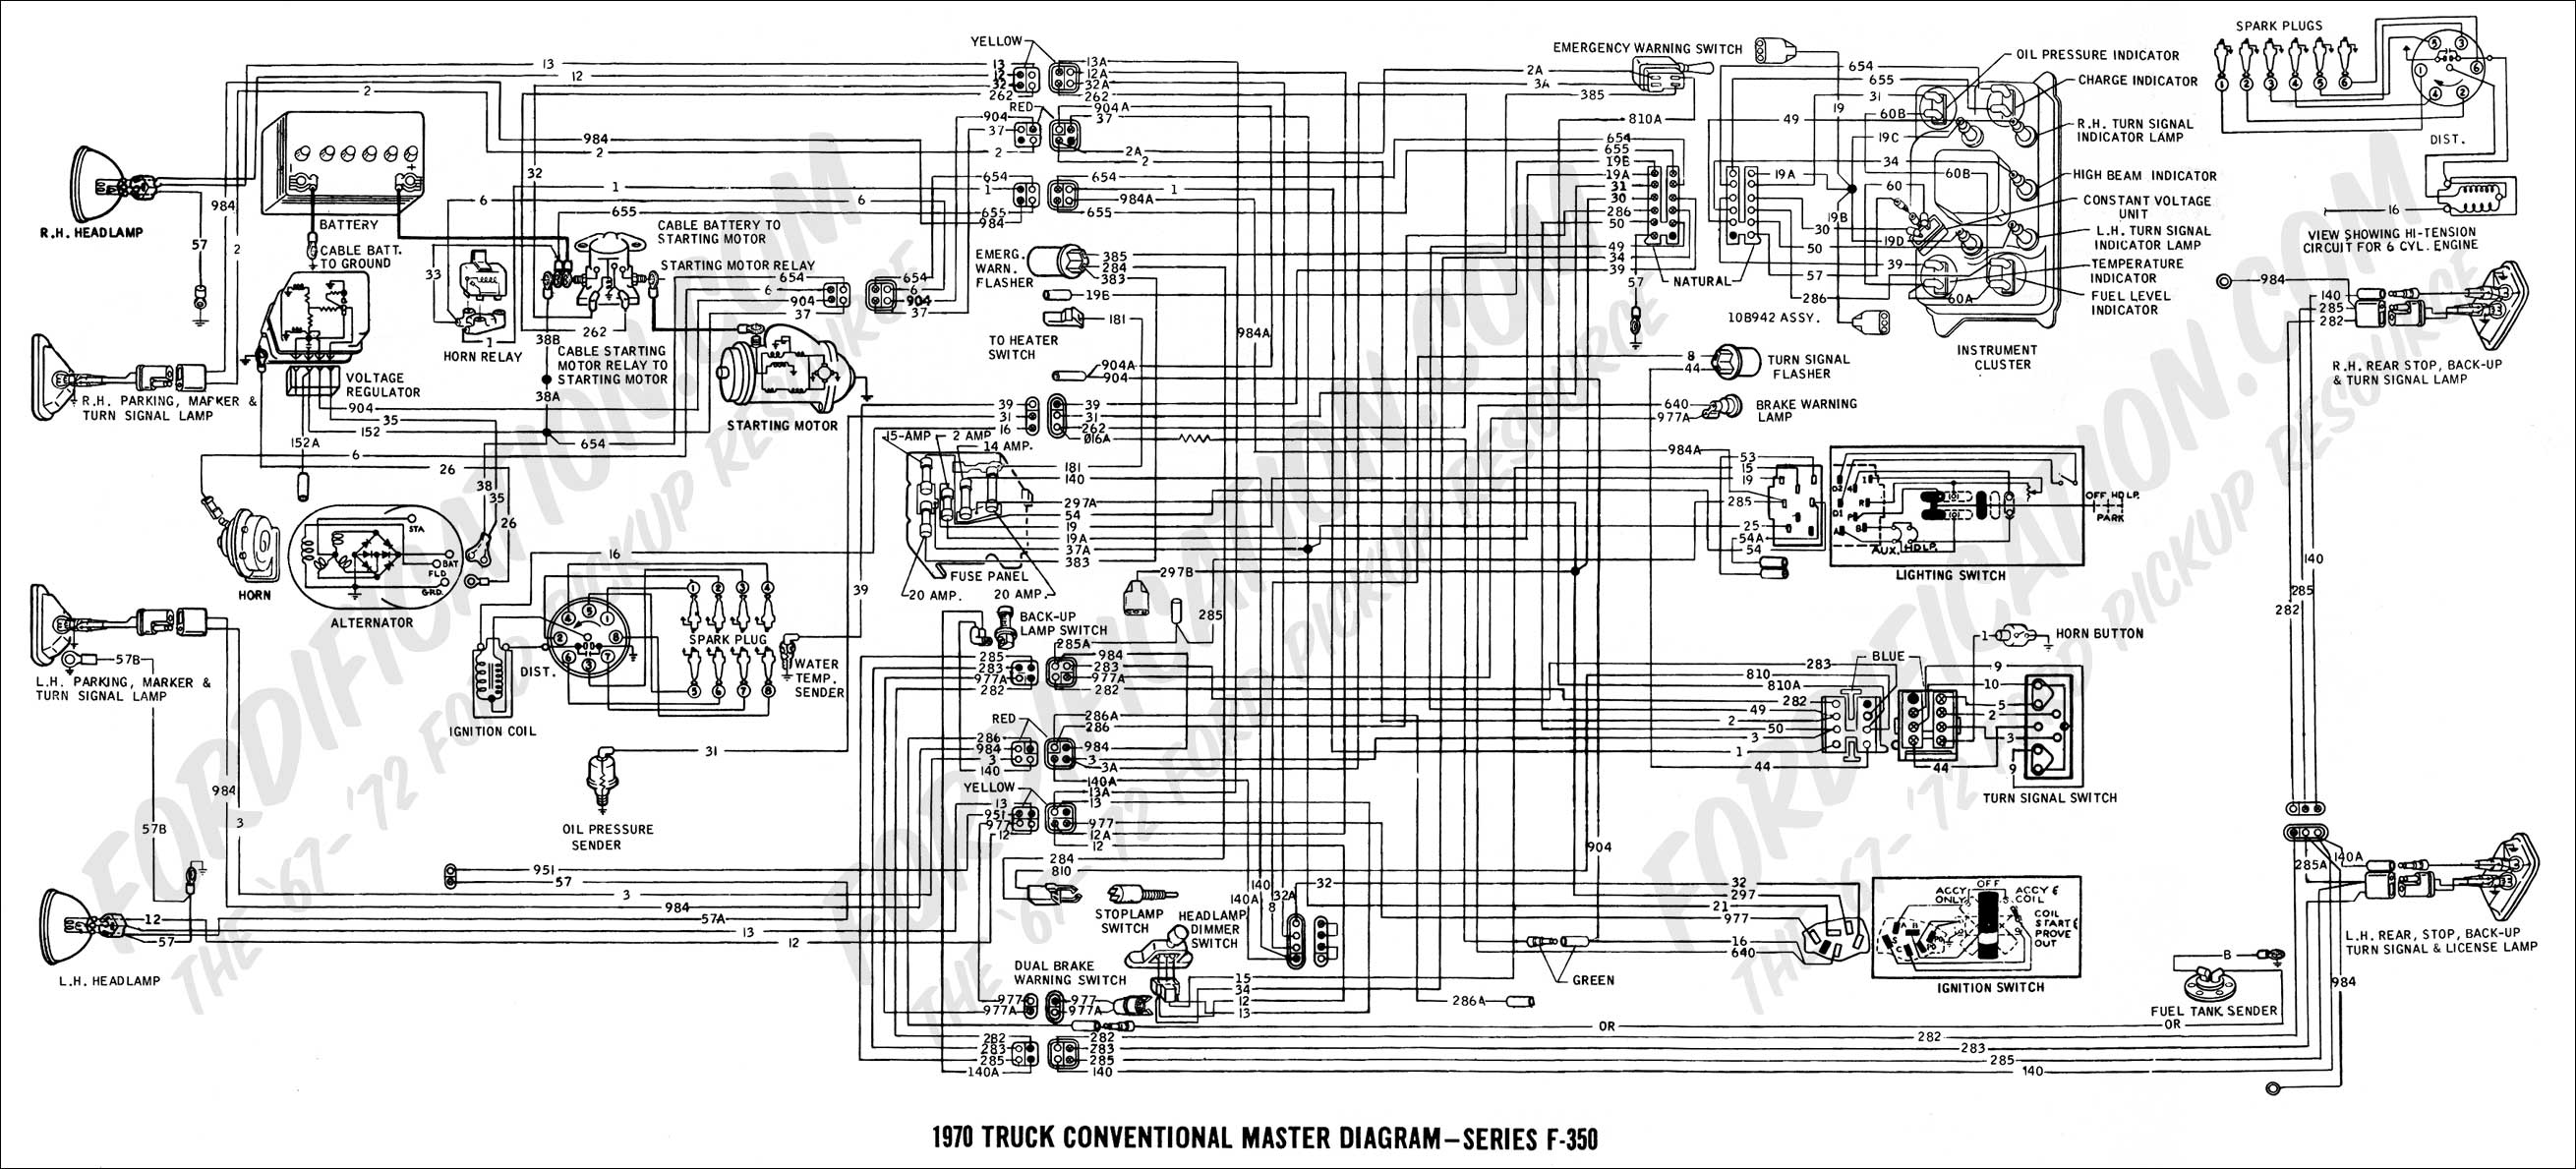 Ford Truck Technical Drawings and Schematics - Section H - Wiring Diagrams Ford ECM Wiring Diagrams FORDification.com